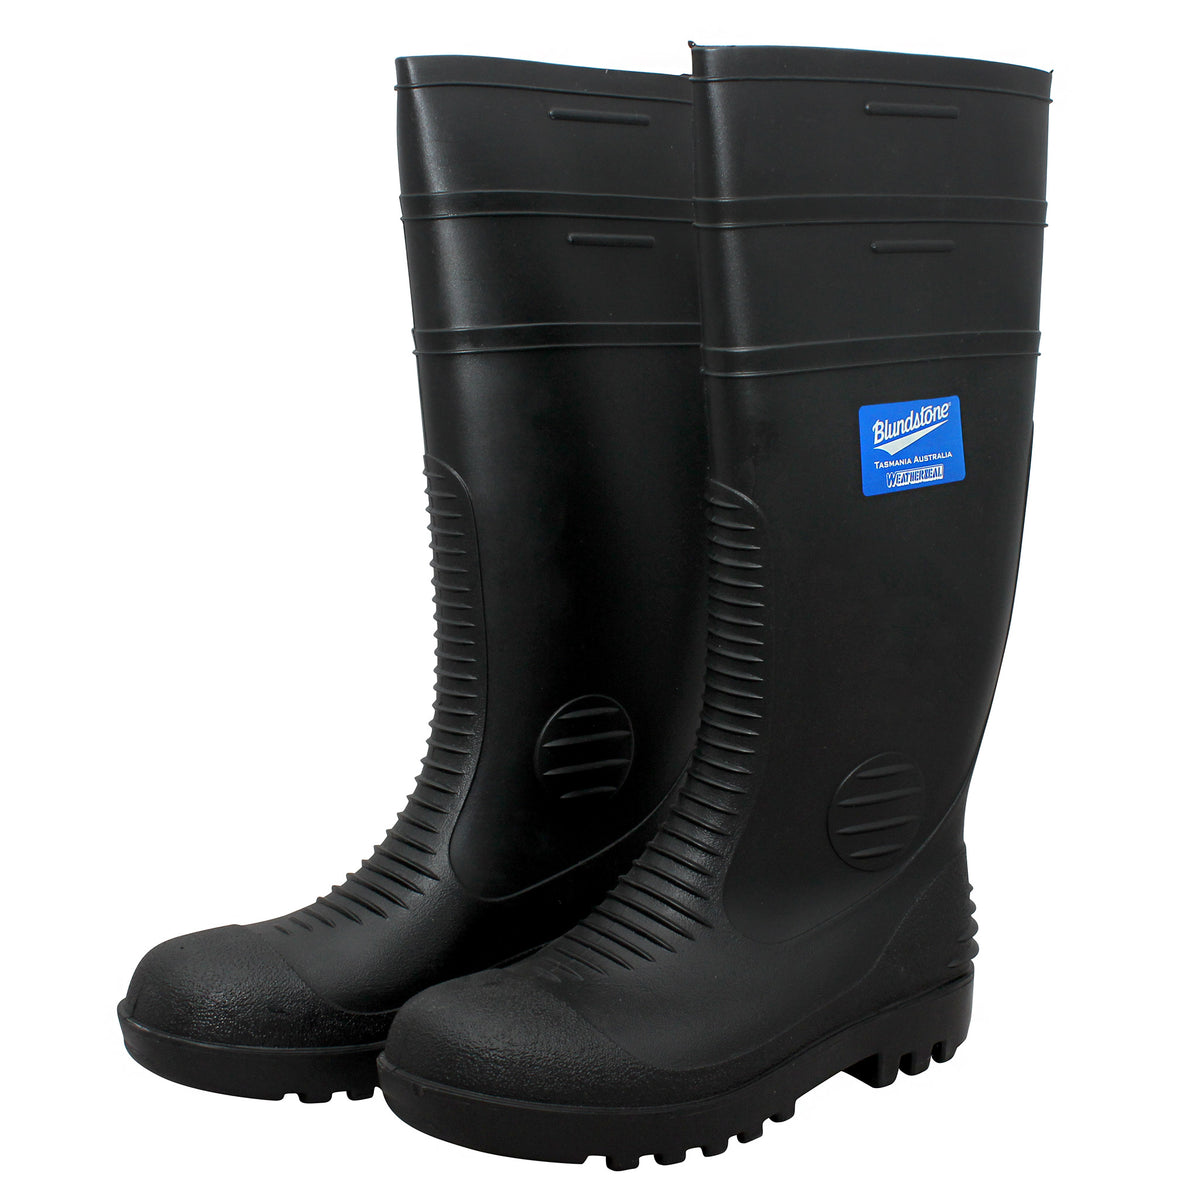 Blundstone Black Rubber Gumboots - Style 001